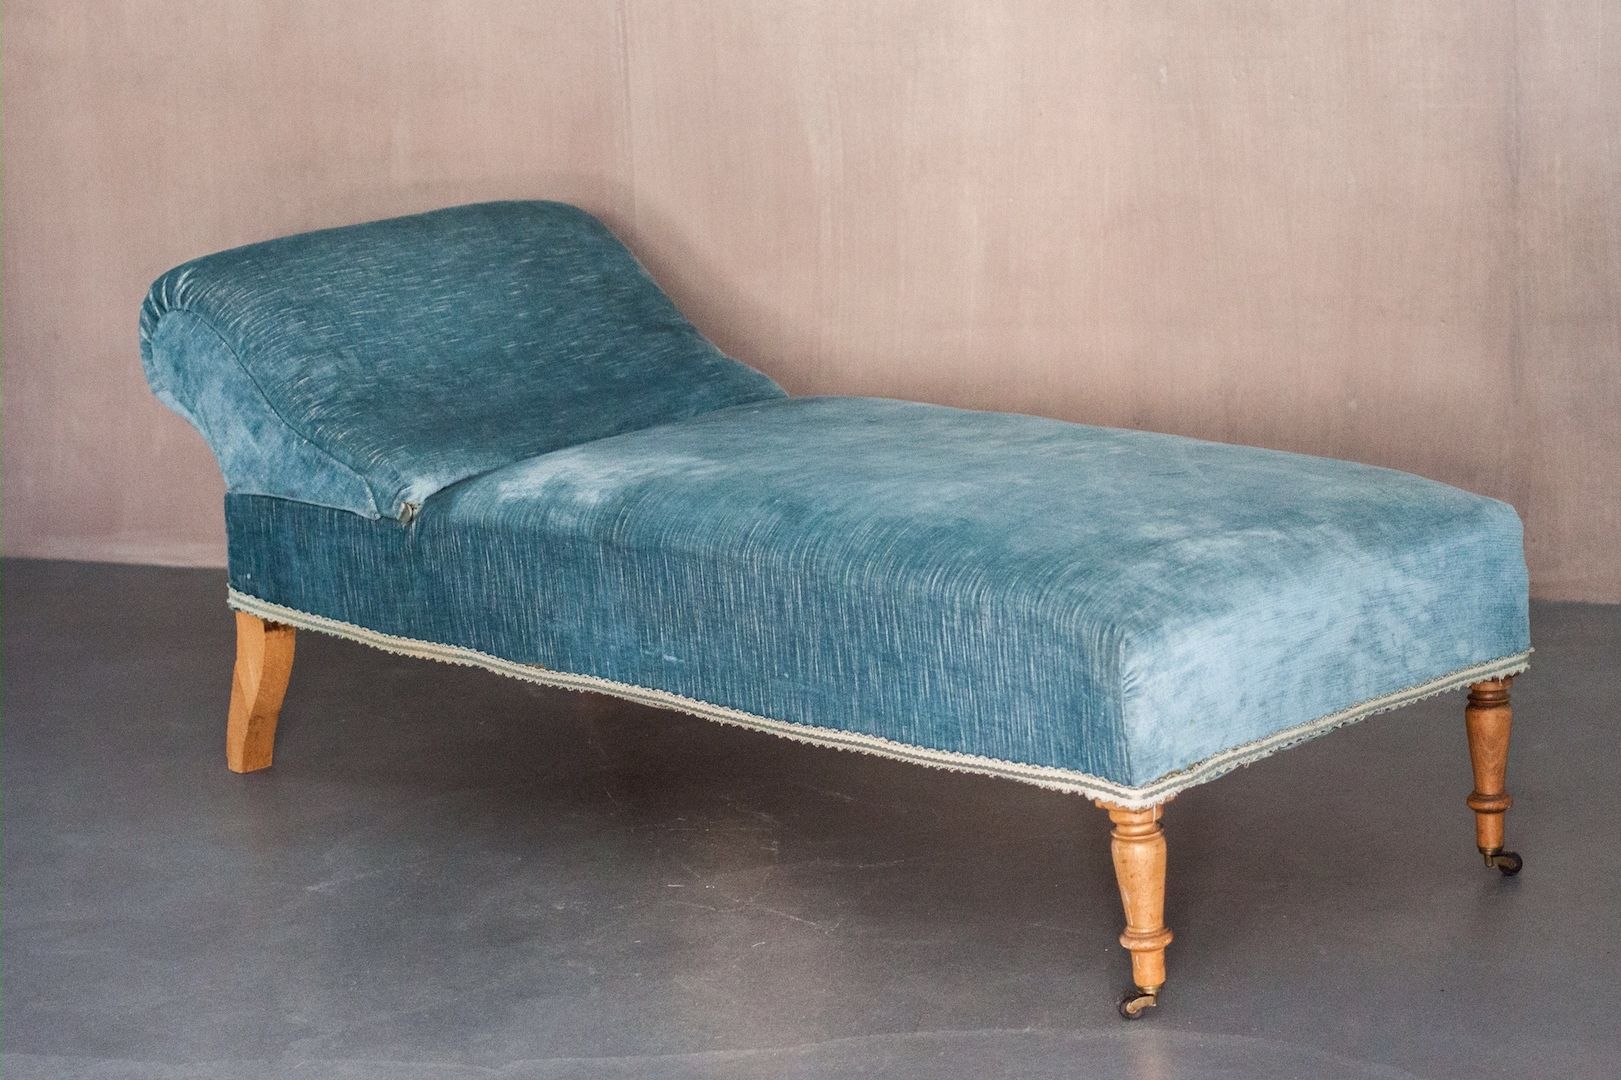 Vintage Chaise Lounge With Sky Blue Velvet Upholstery For Sale At In Popular Velvet Chaise Lounges (View 7 of 15)